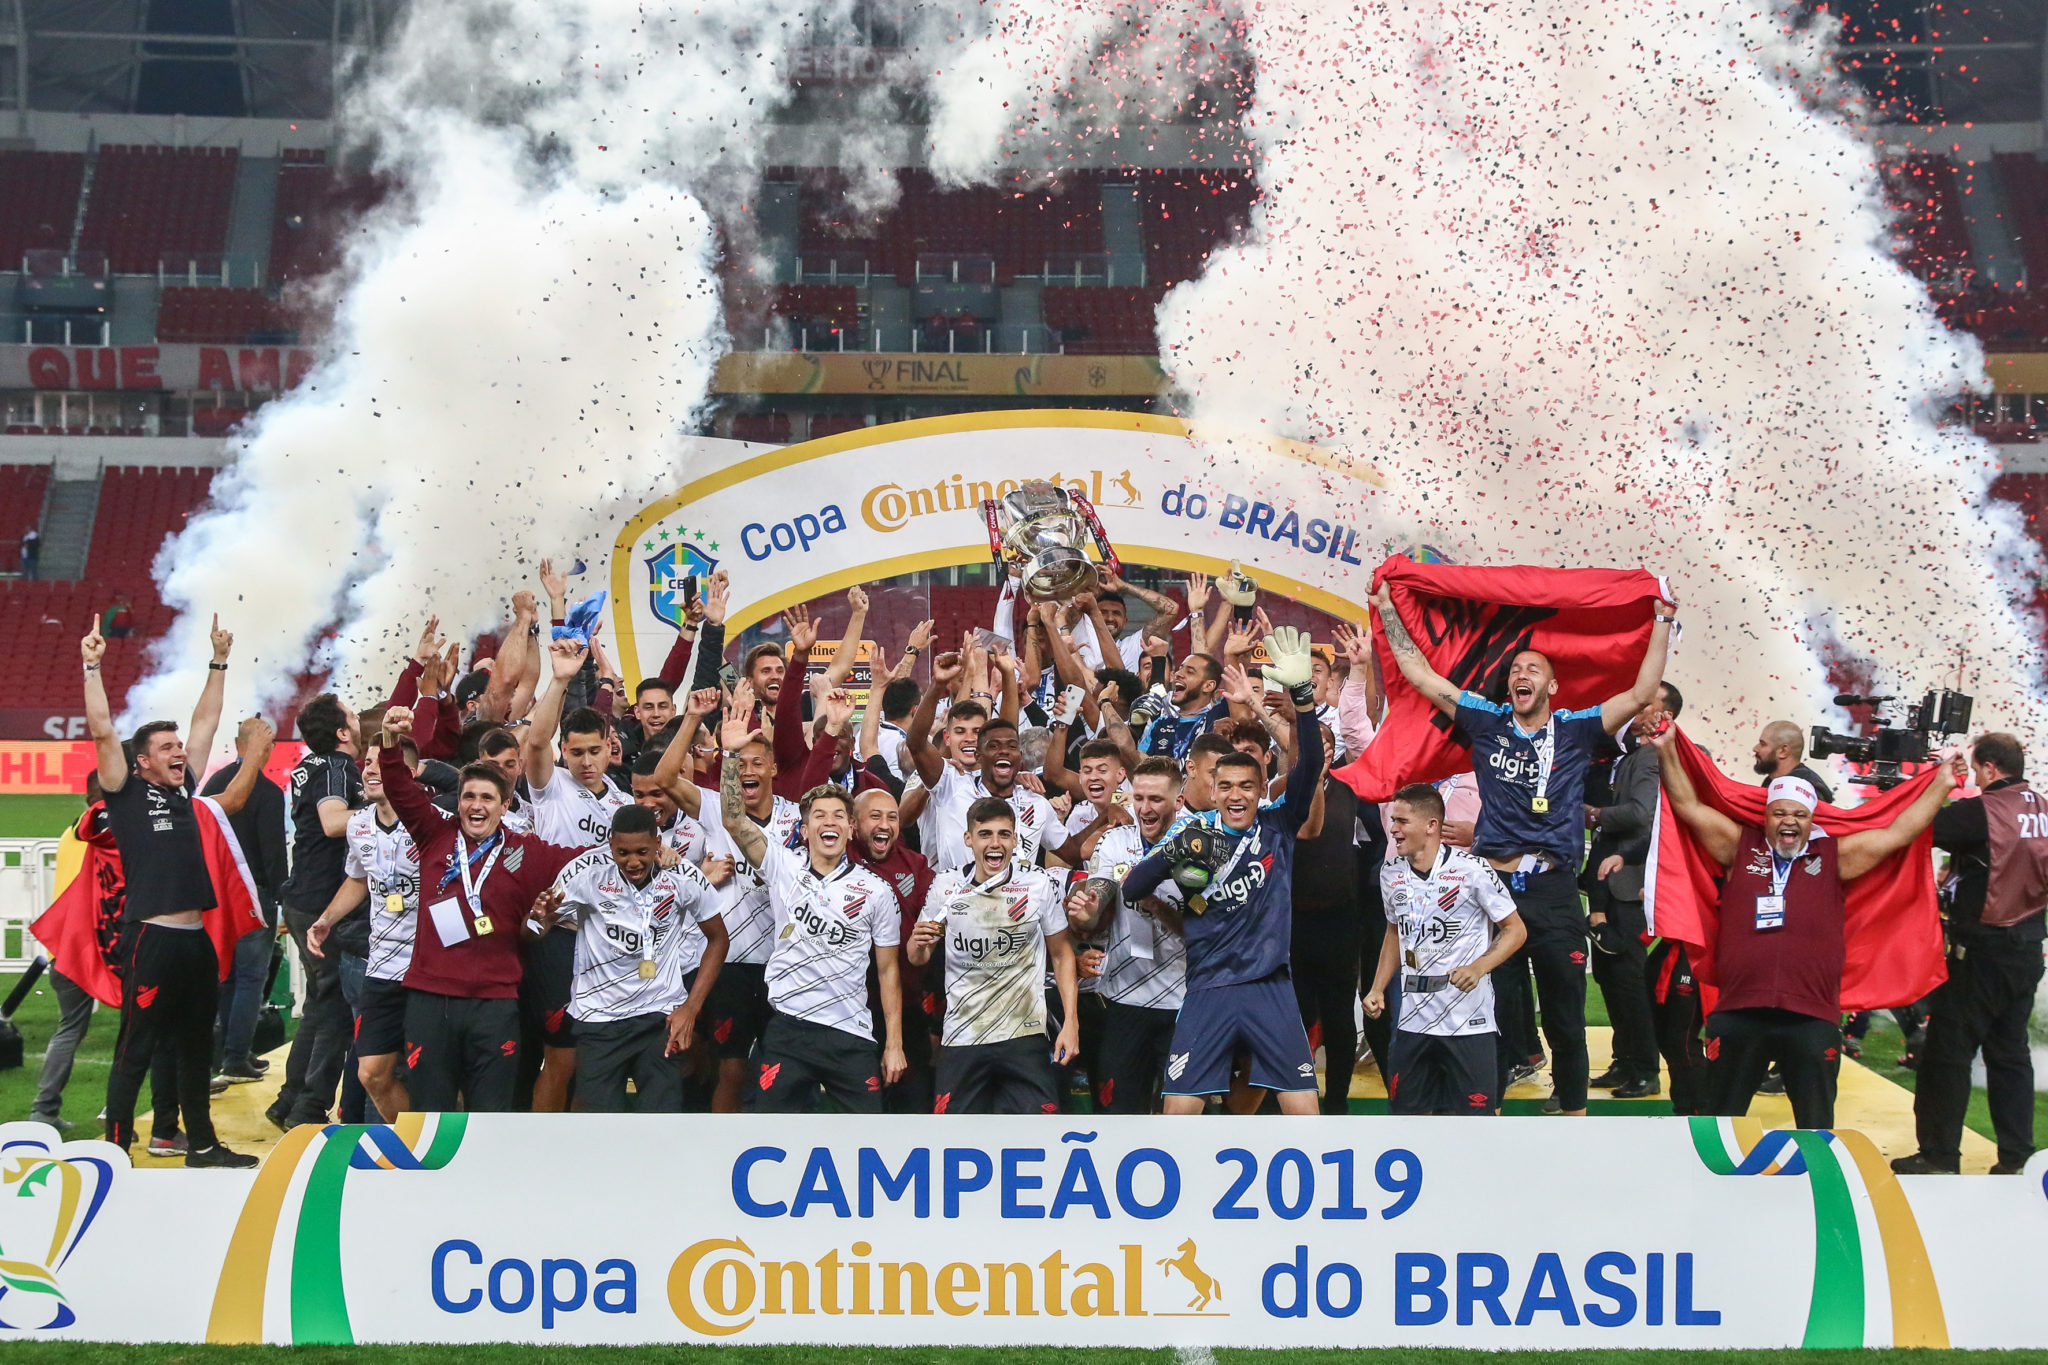 PORTO ALEGRE, BRAZIL - SEPTEMBER 18: Players of Athletico PR celebrate with the trophy after a match between Internacional and Athletico PR as part of Copa do Brasil Final, at Beira-Rio Stadium on September 18, 2019 in Porto Alegre, Brazil. (Photo by Lucas Uebel/Getty Images)